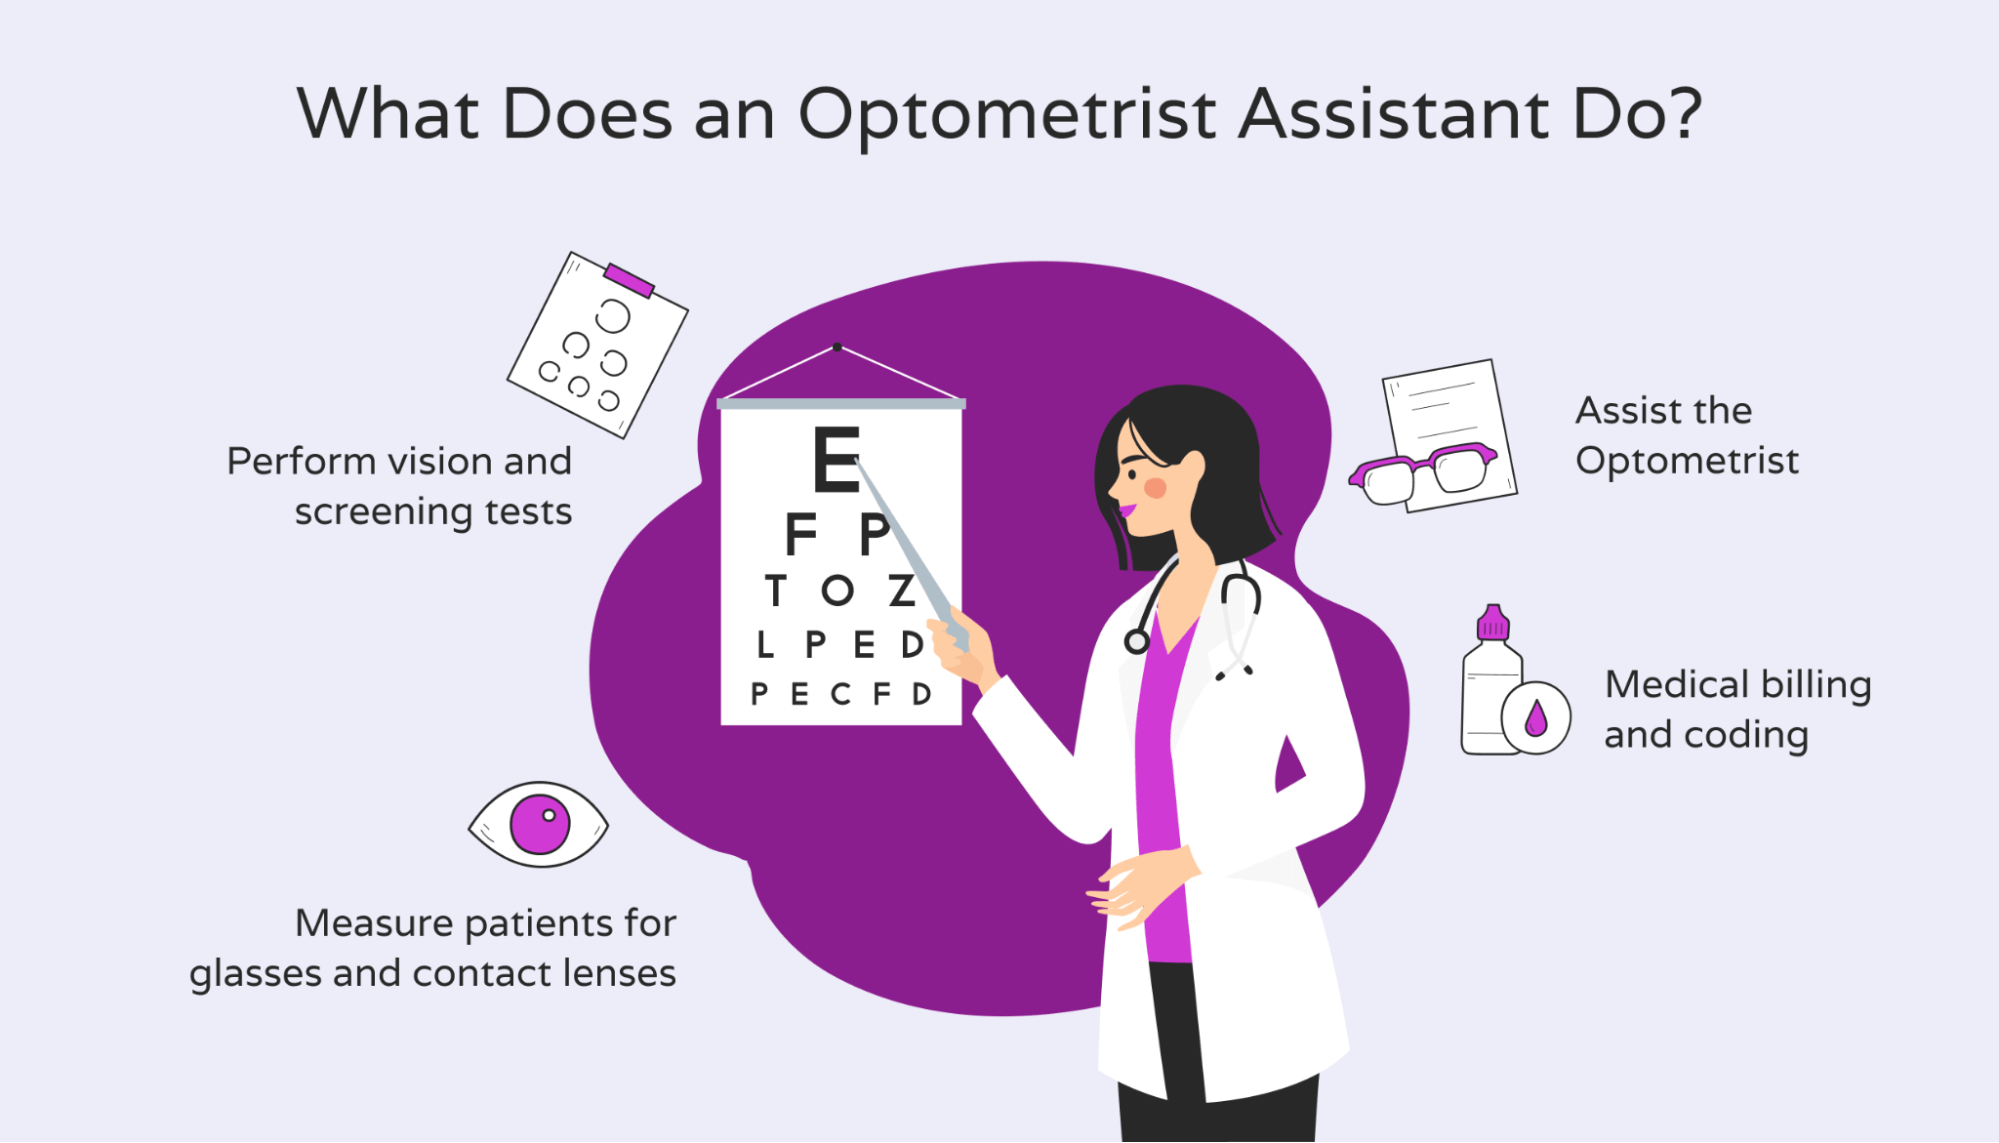 Daily responsibilities of an Optometrist Assistant